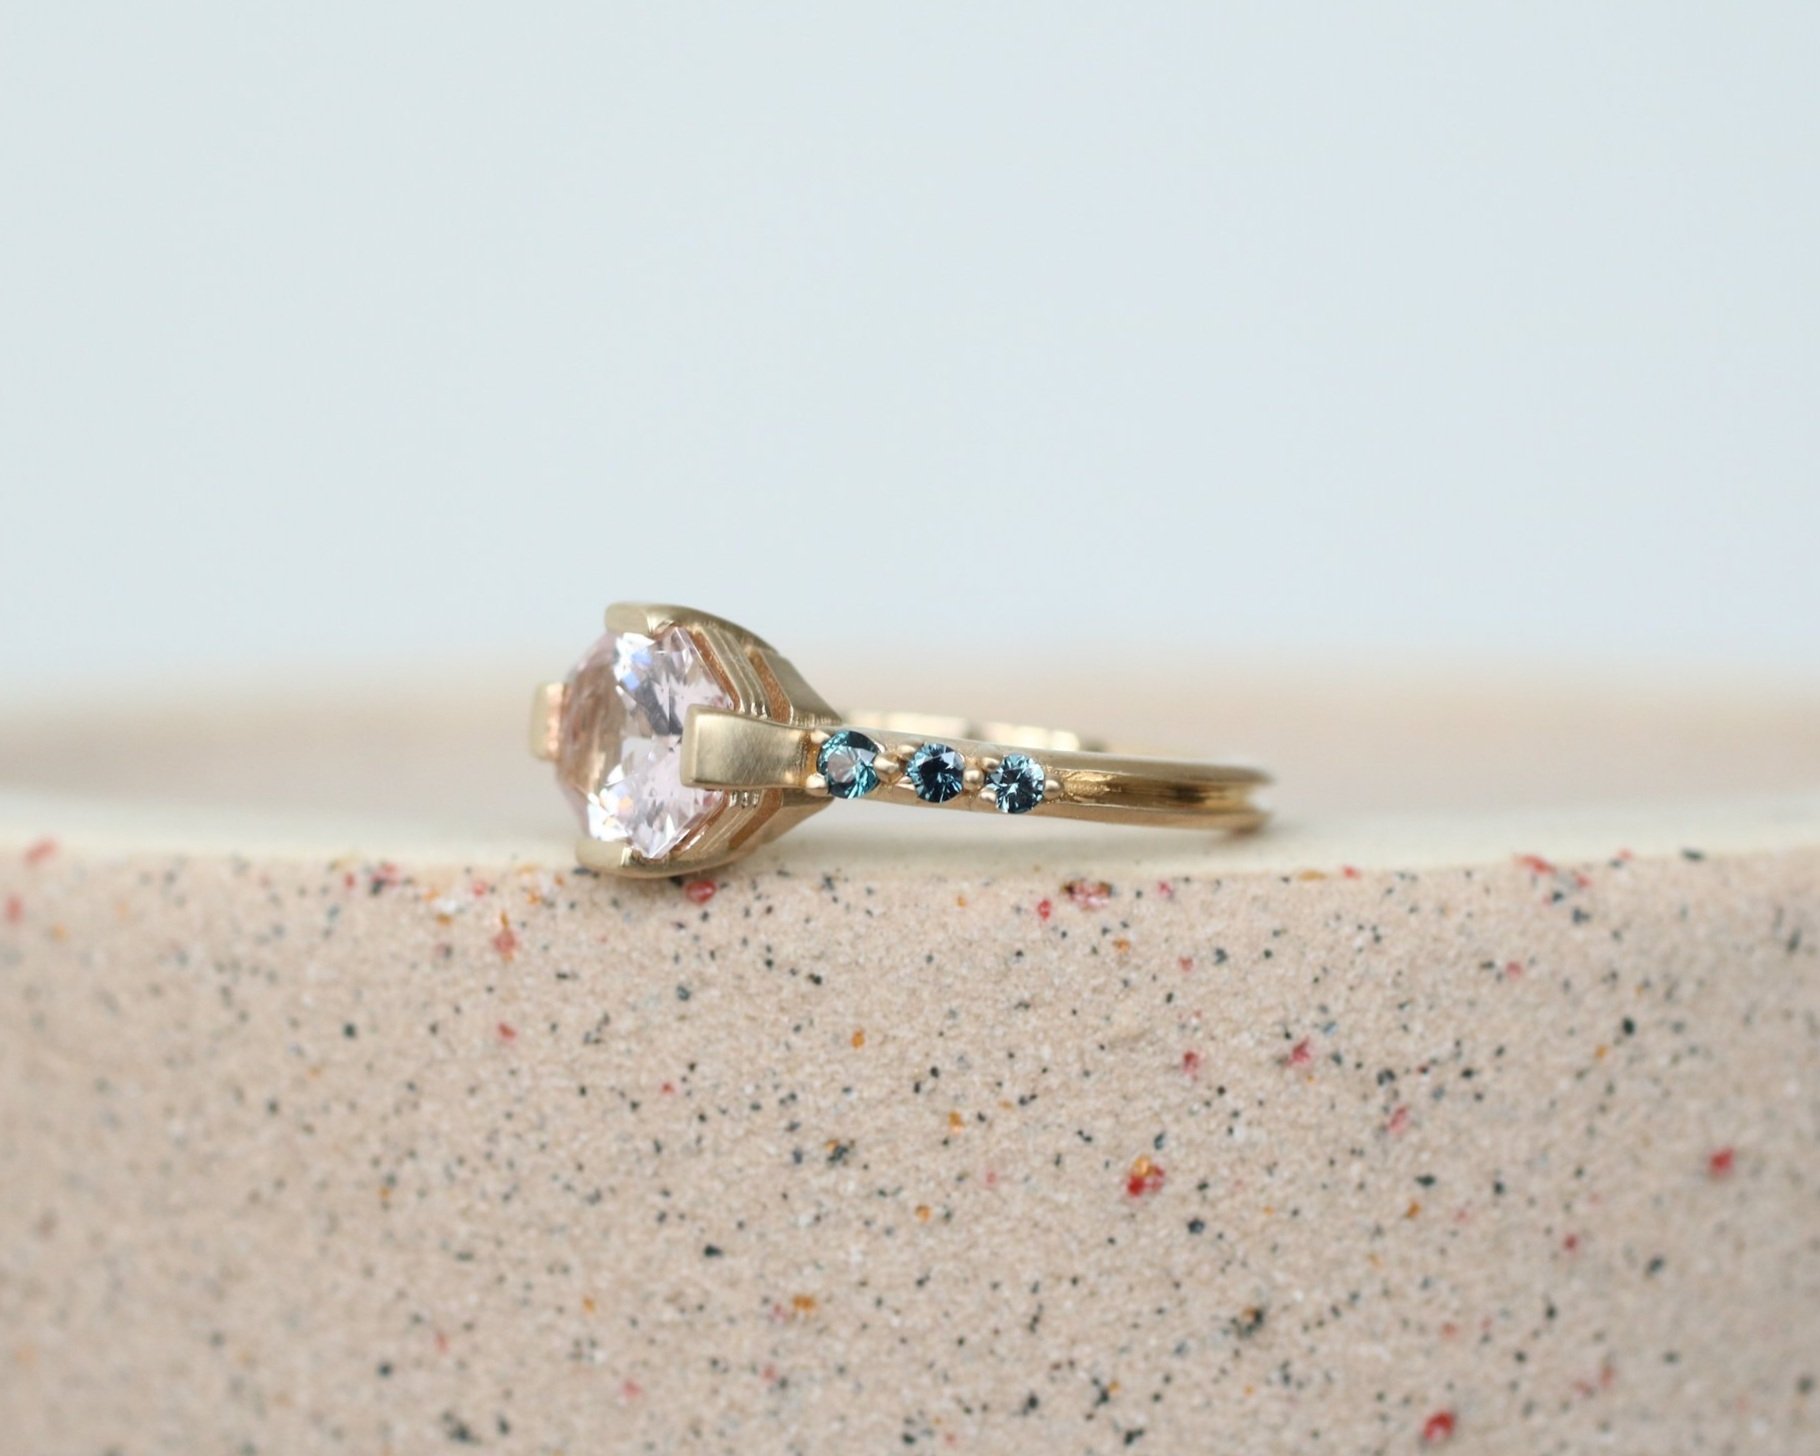 Kat engagement ring - Morganite center stone + grey spinel accents + 14k yellow gold